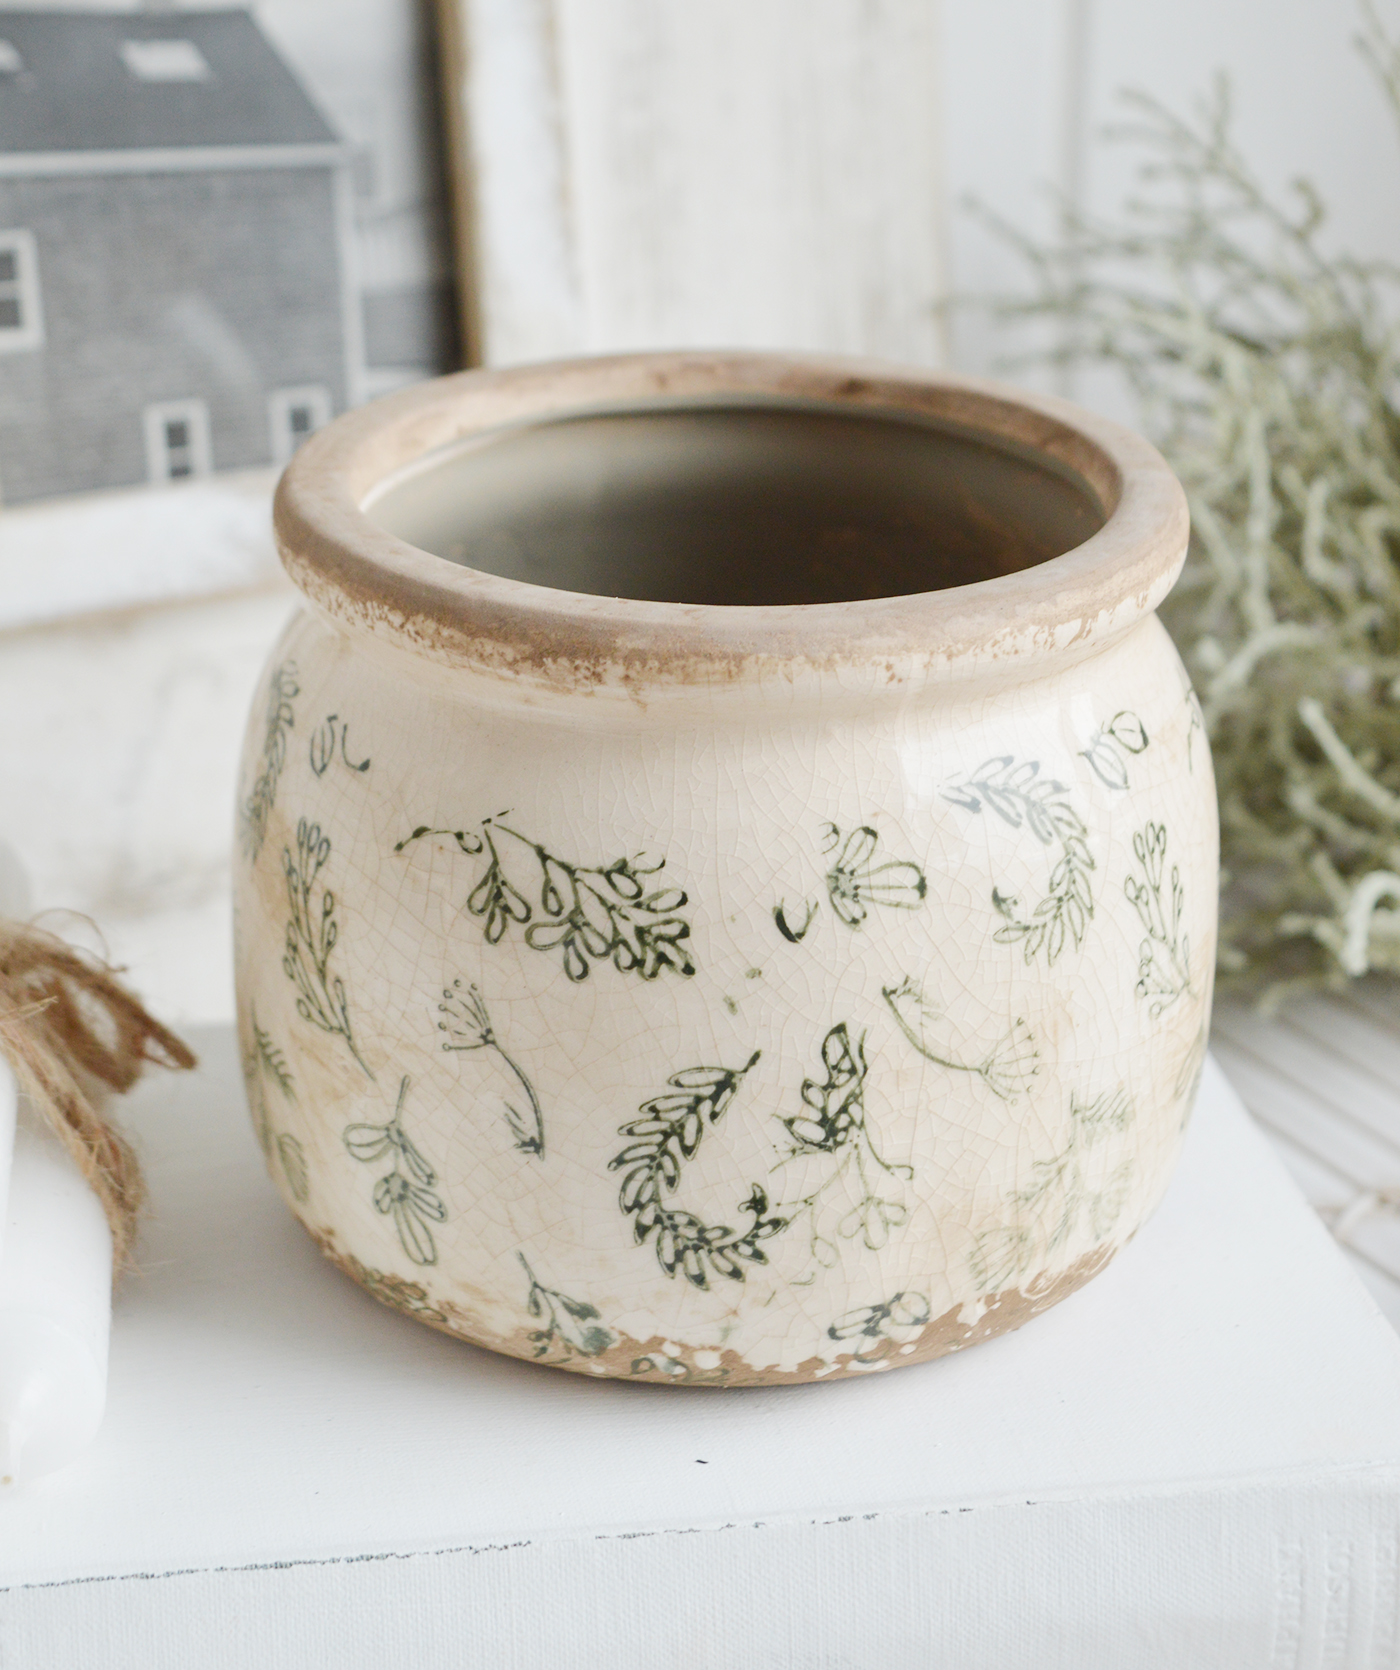 Westbrook vintage style ceramic pot to suit New England interiors complementing modern farmhouse, country and coastal furniture